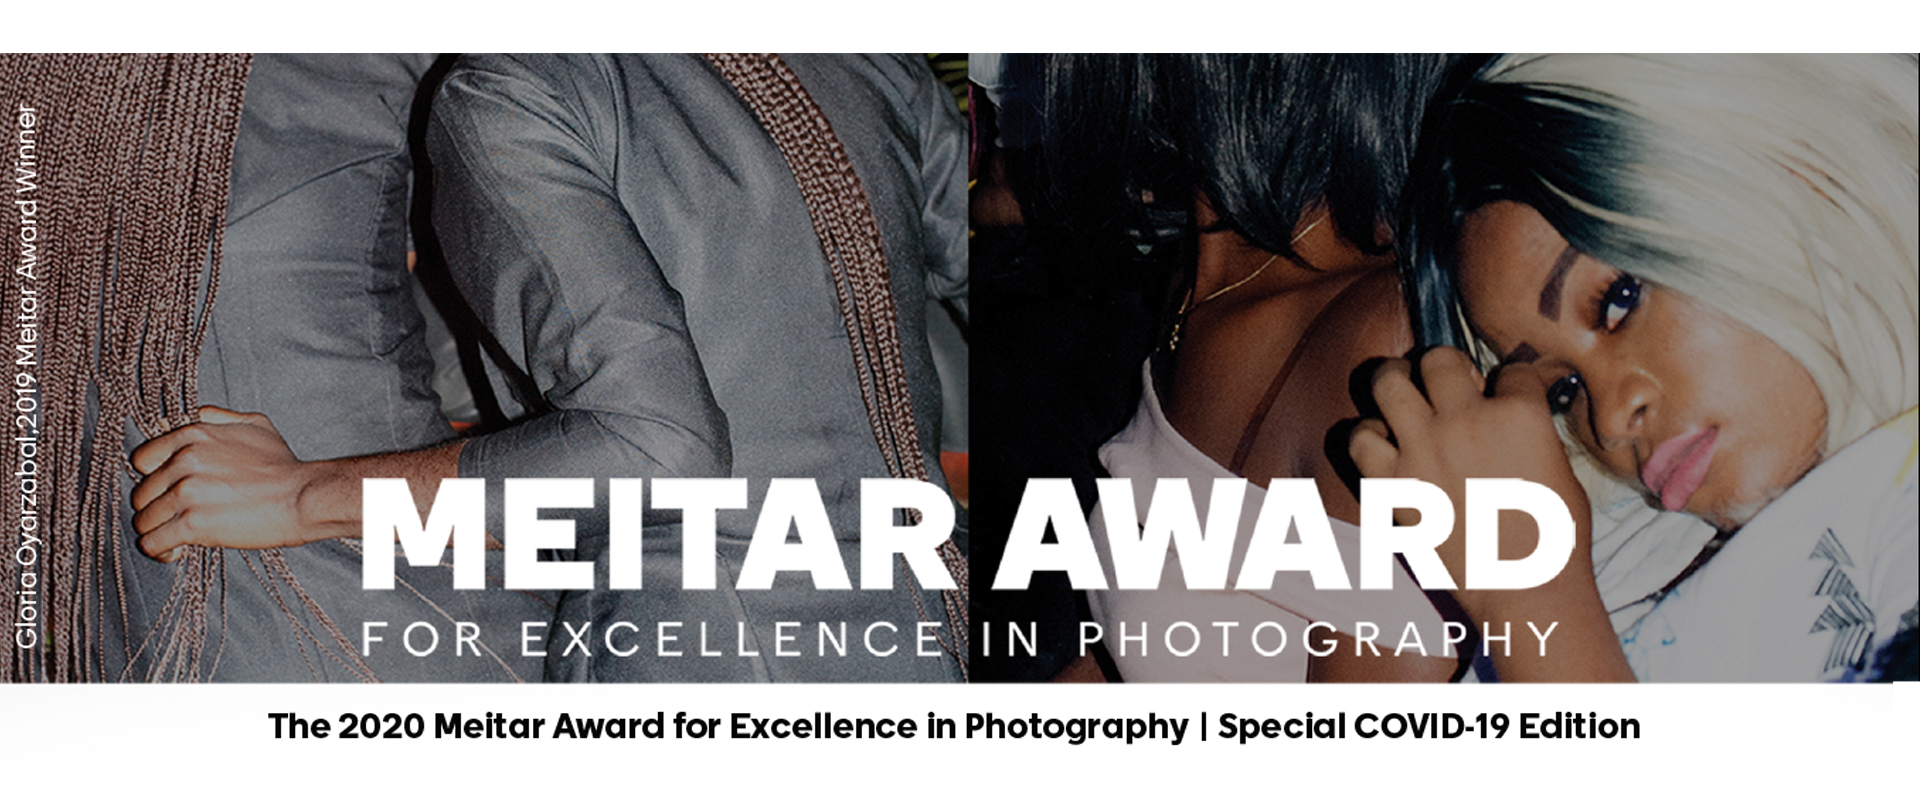 Meitar Award for Excellence in Photography